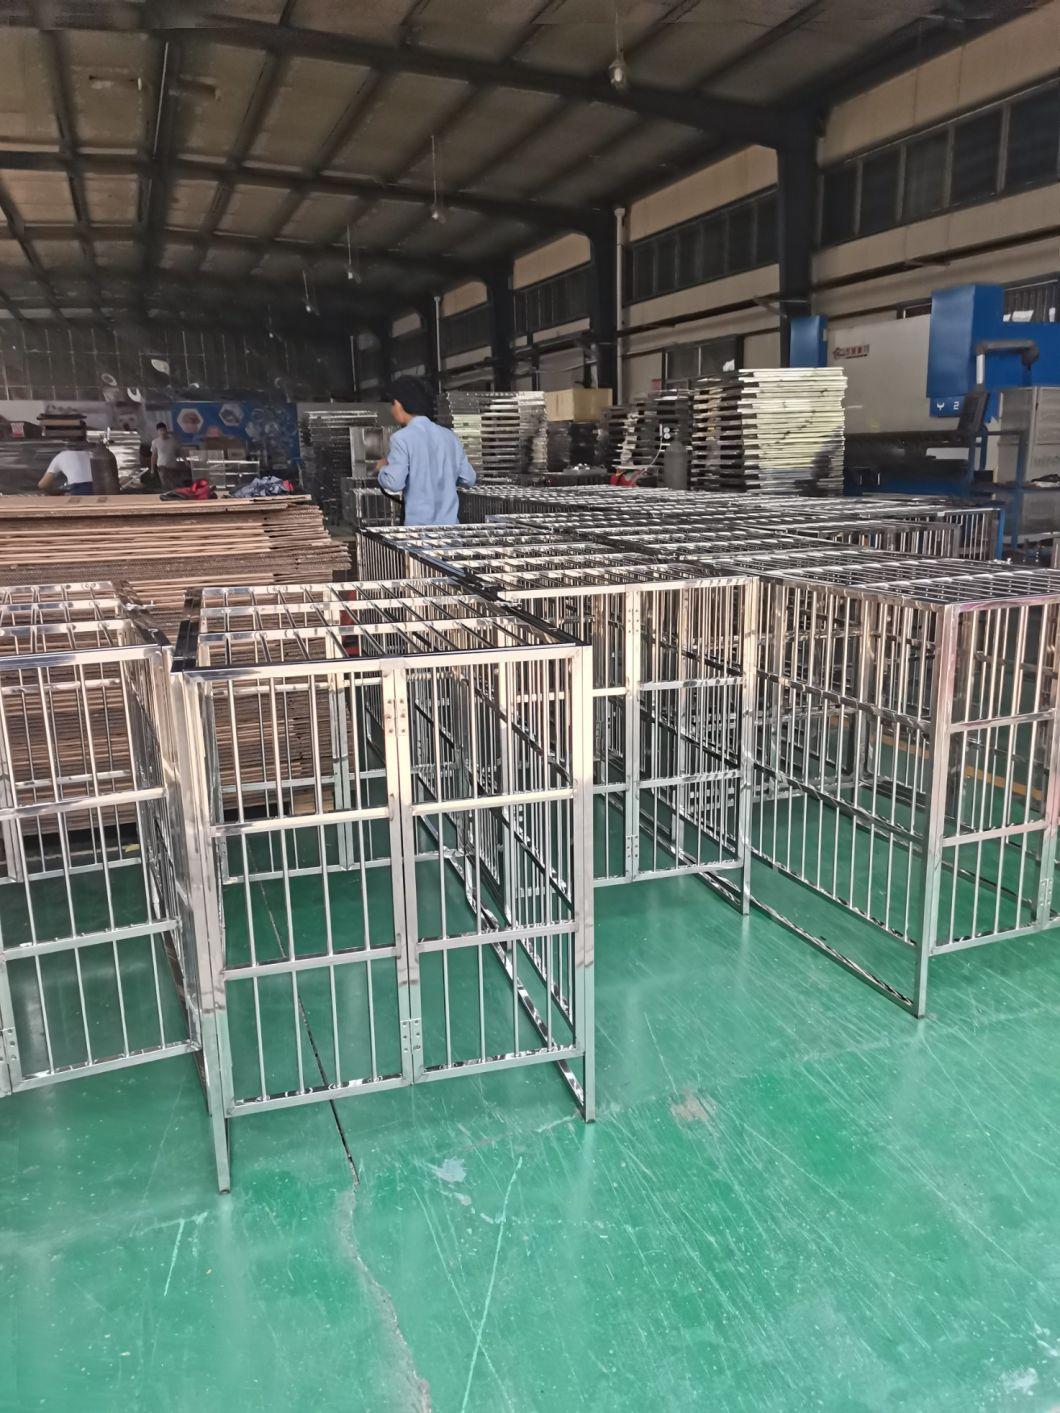 Stainless Steel High-Grade Cat and Dog Cage Household Pet Shop Double-Layer Combination Boarding Hospital Infusion Cage